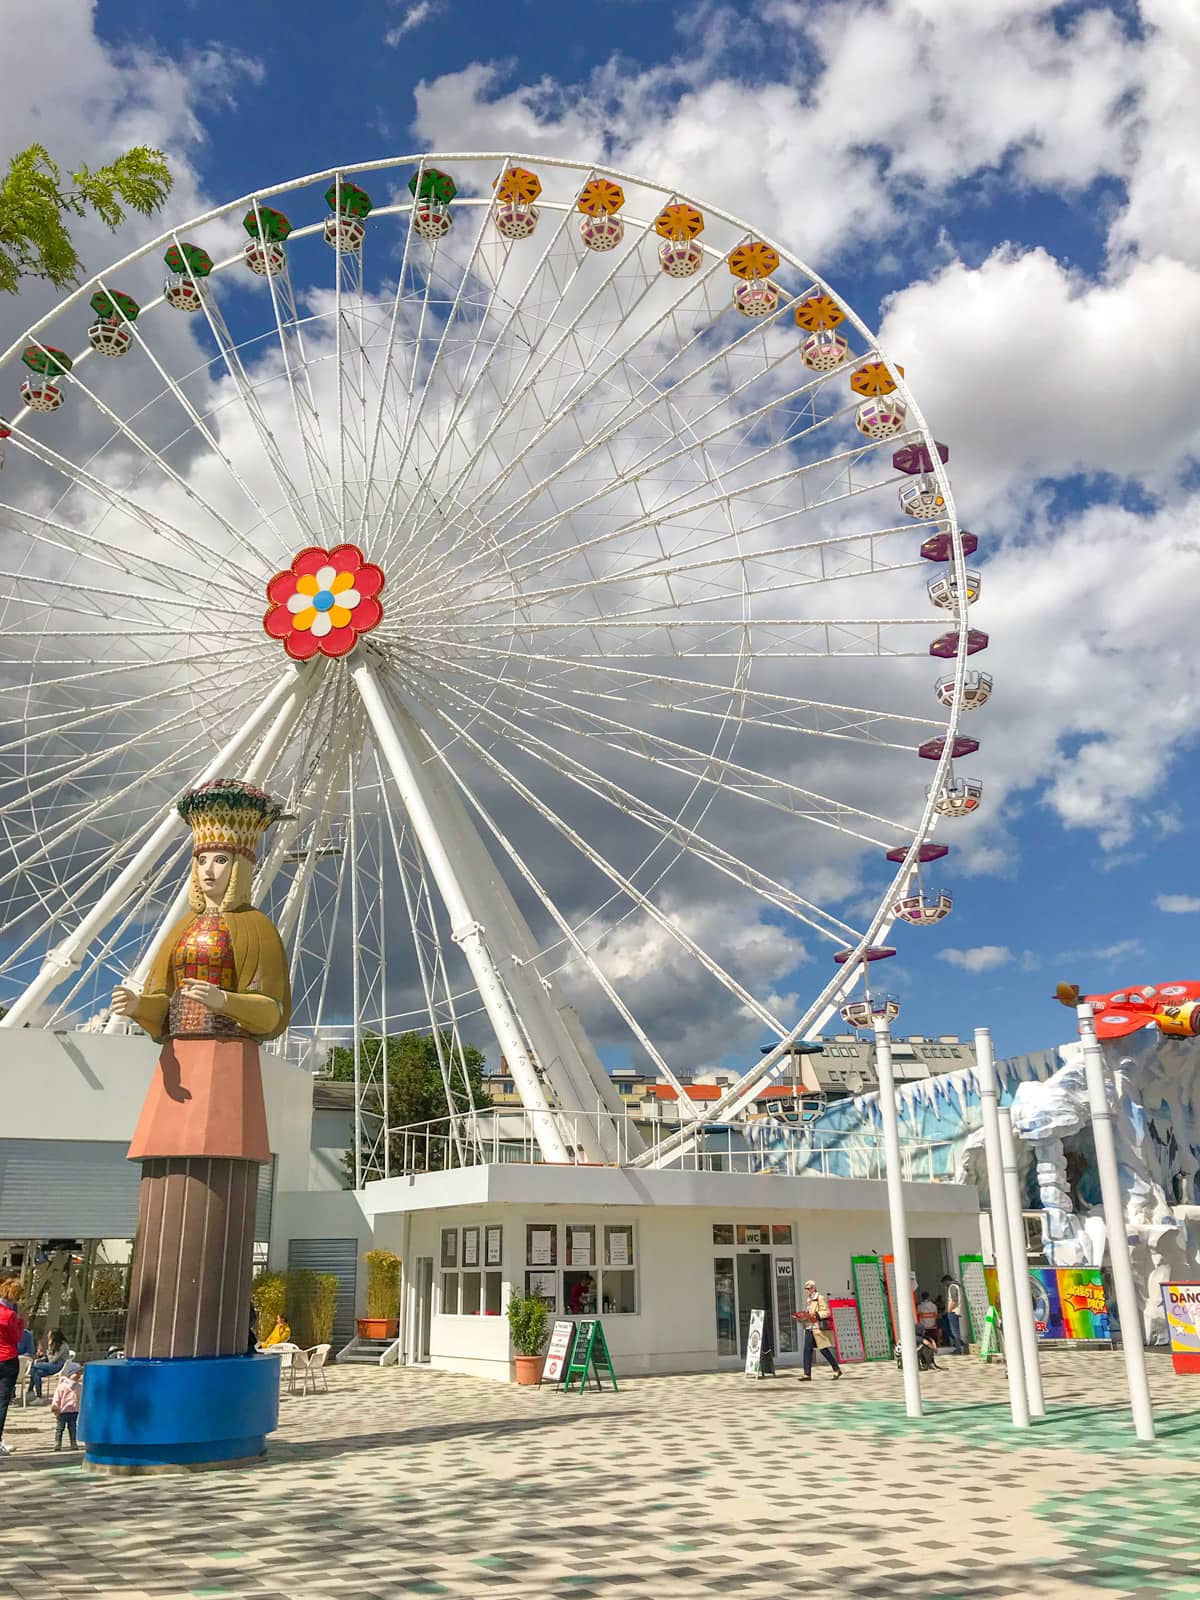 A giant white ferris wheel with bright blue sky in the background. The sky has many clouds. In the foreground is a large colourful figurine with a patterned hat